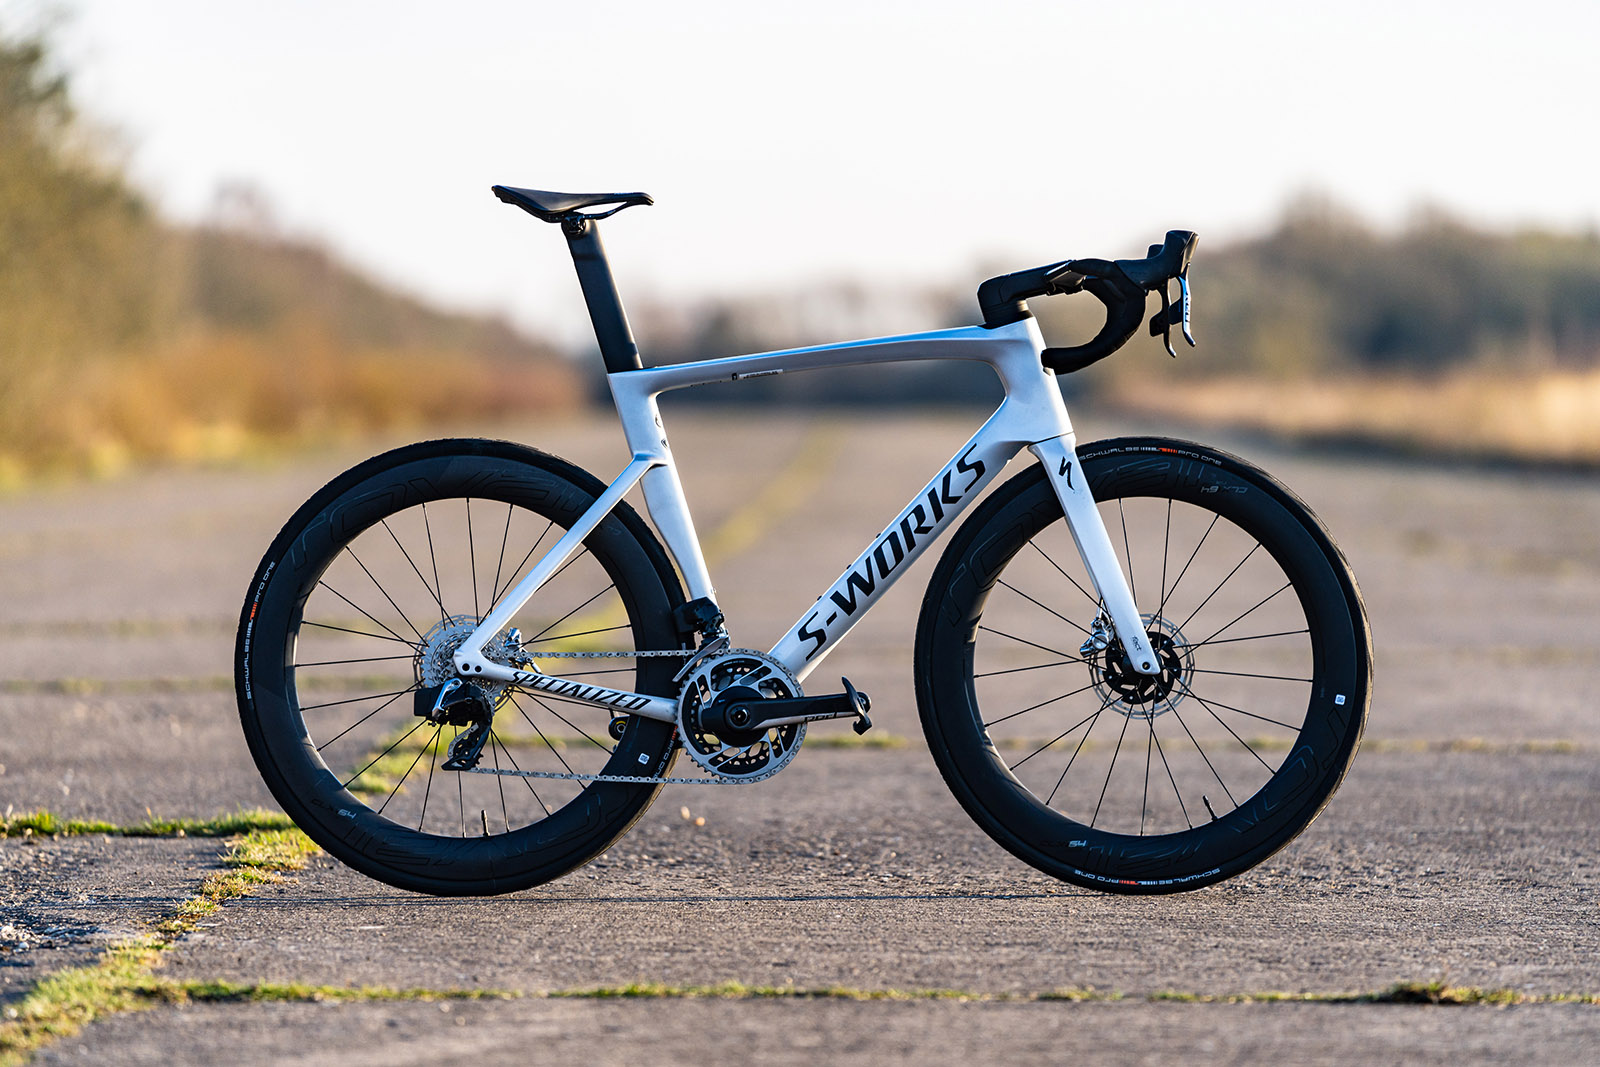 Simon says the Tarmac, bring back the Specialized Venge